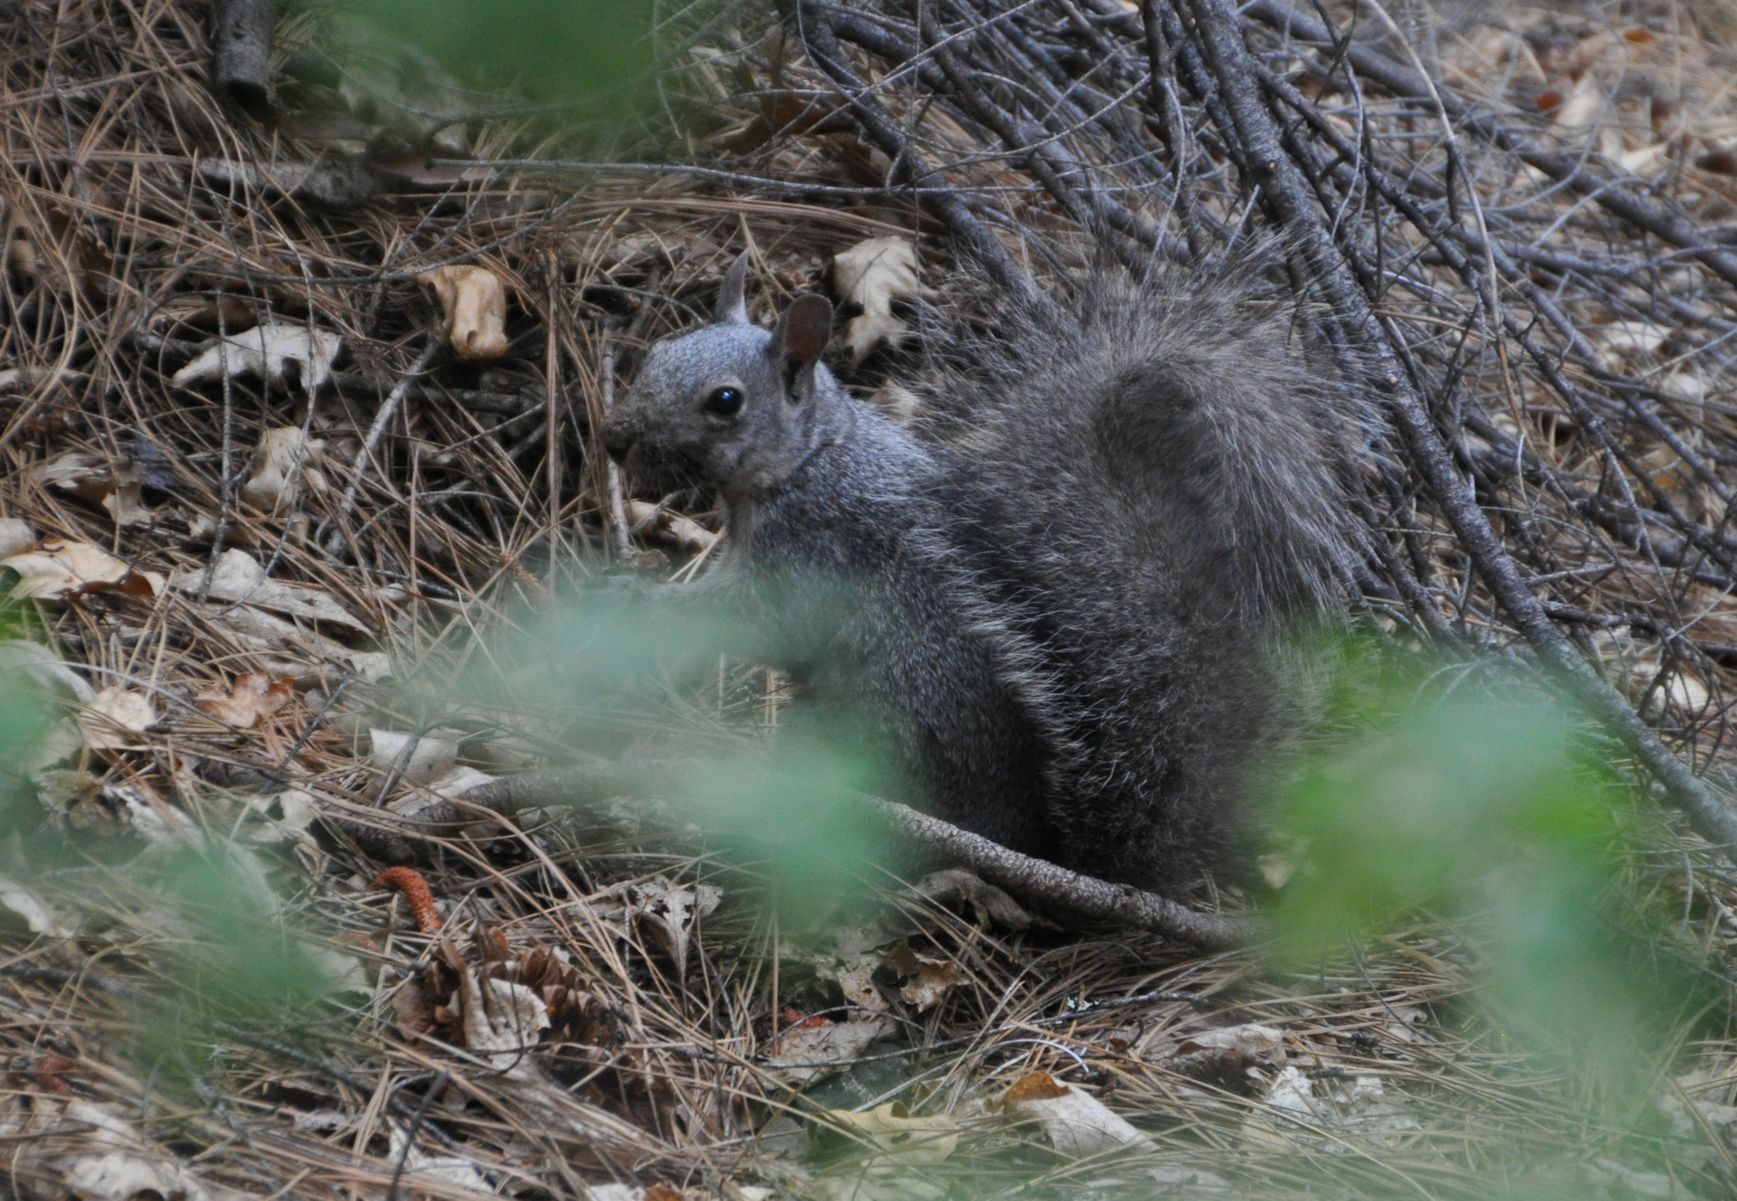 Gray squirrel looks at me